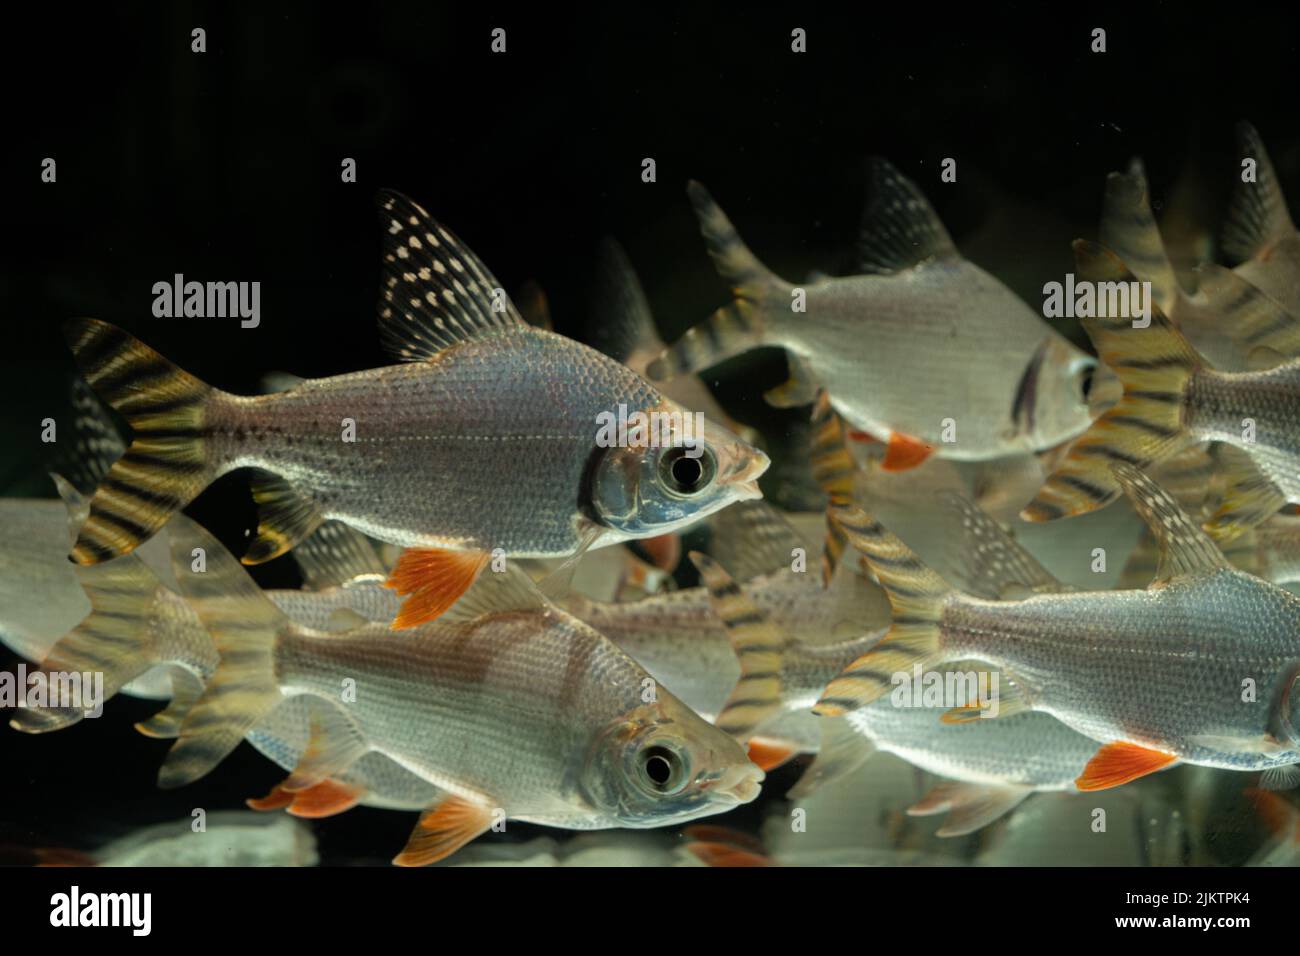 A school of silver prochilodus fishes swimming in an aquarium Stock Photo